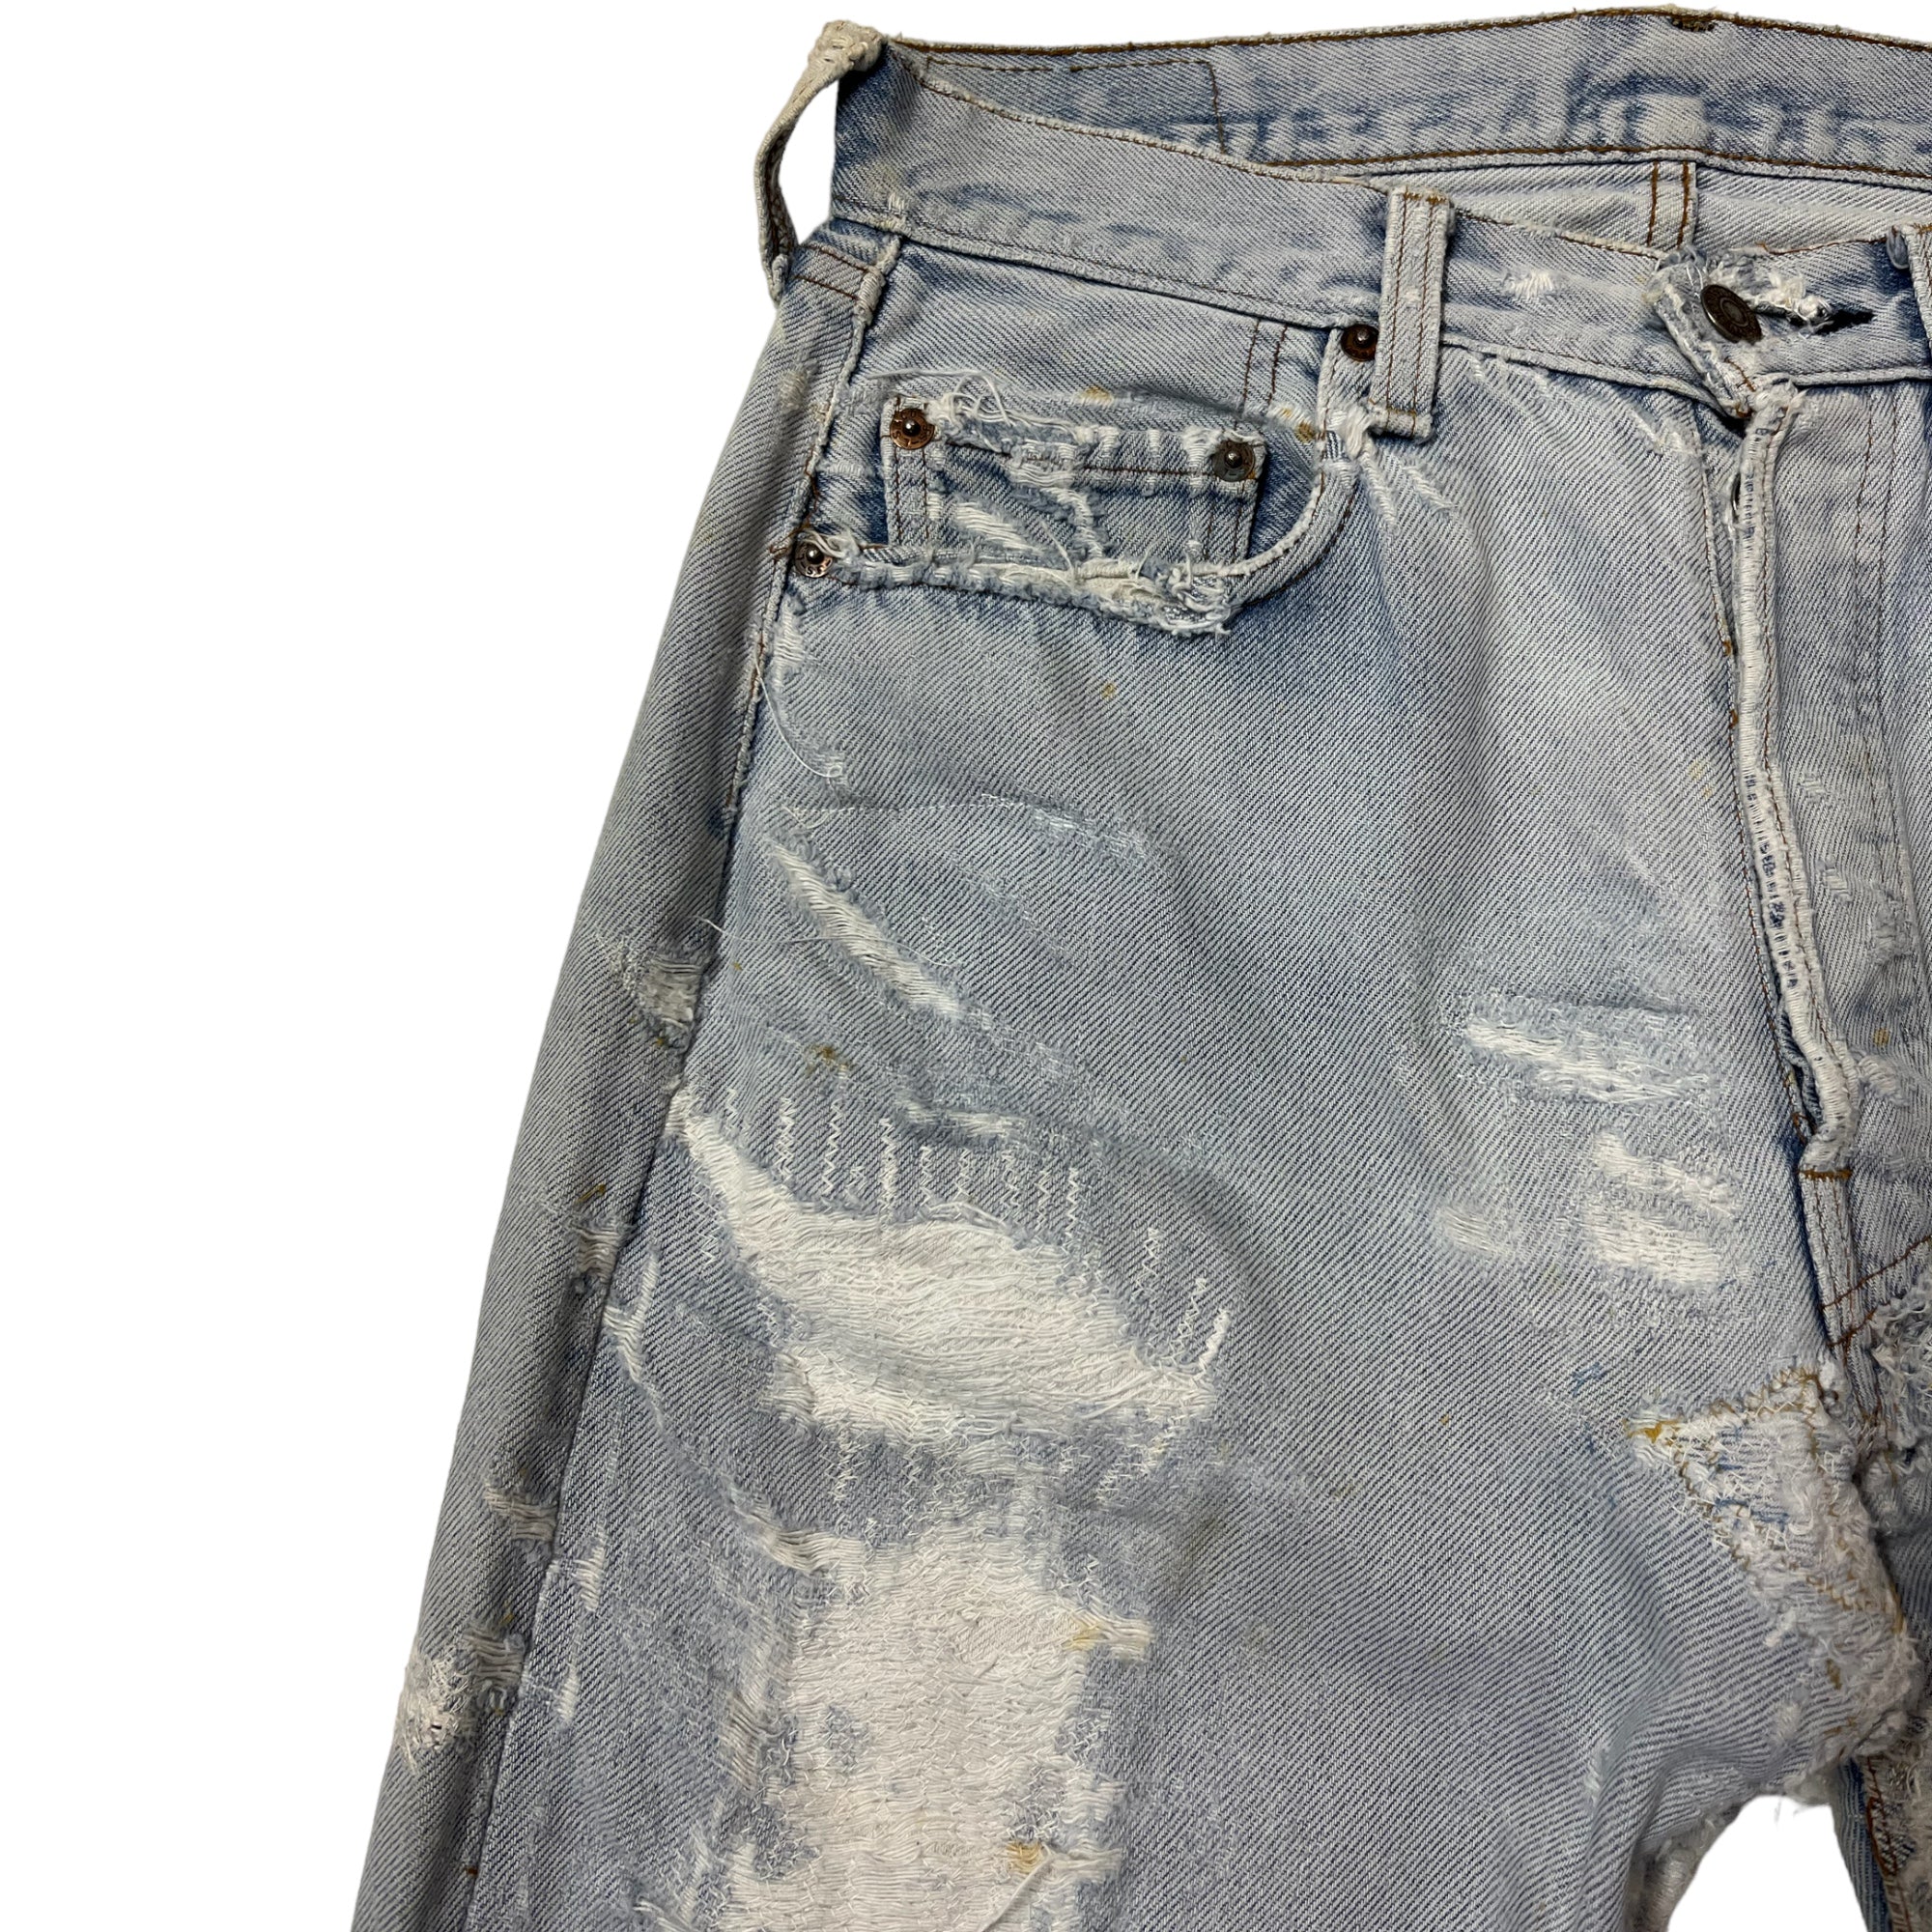 Early 80s Levi’s Redline Selvedge 501 Denim Jeans with Extensive Repairs - Lightwash Blue - 31x31